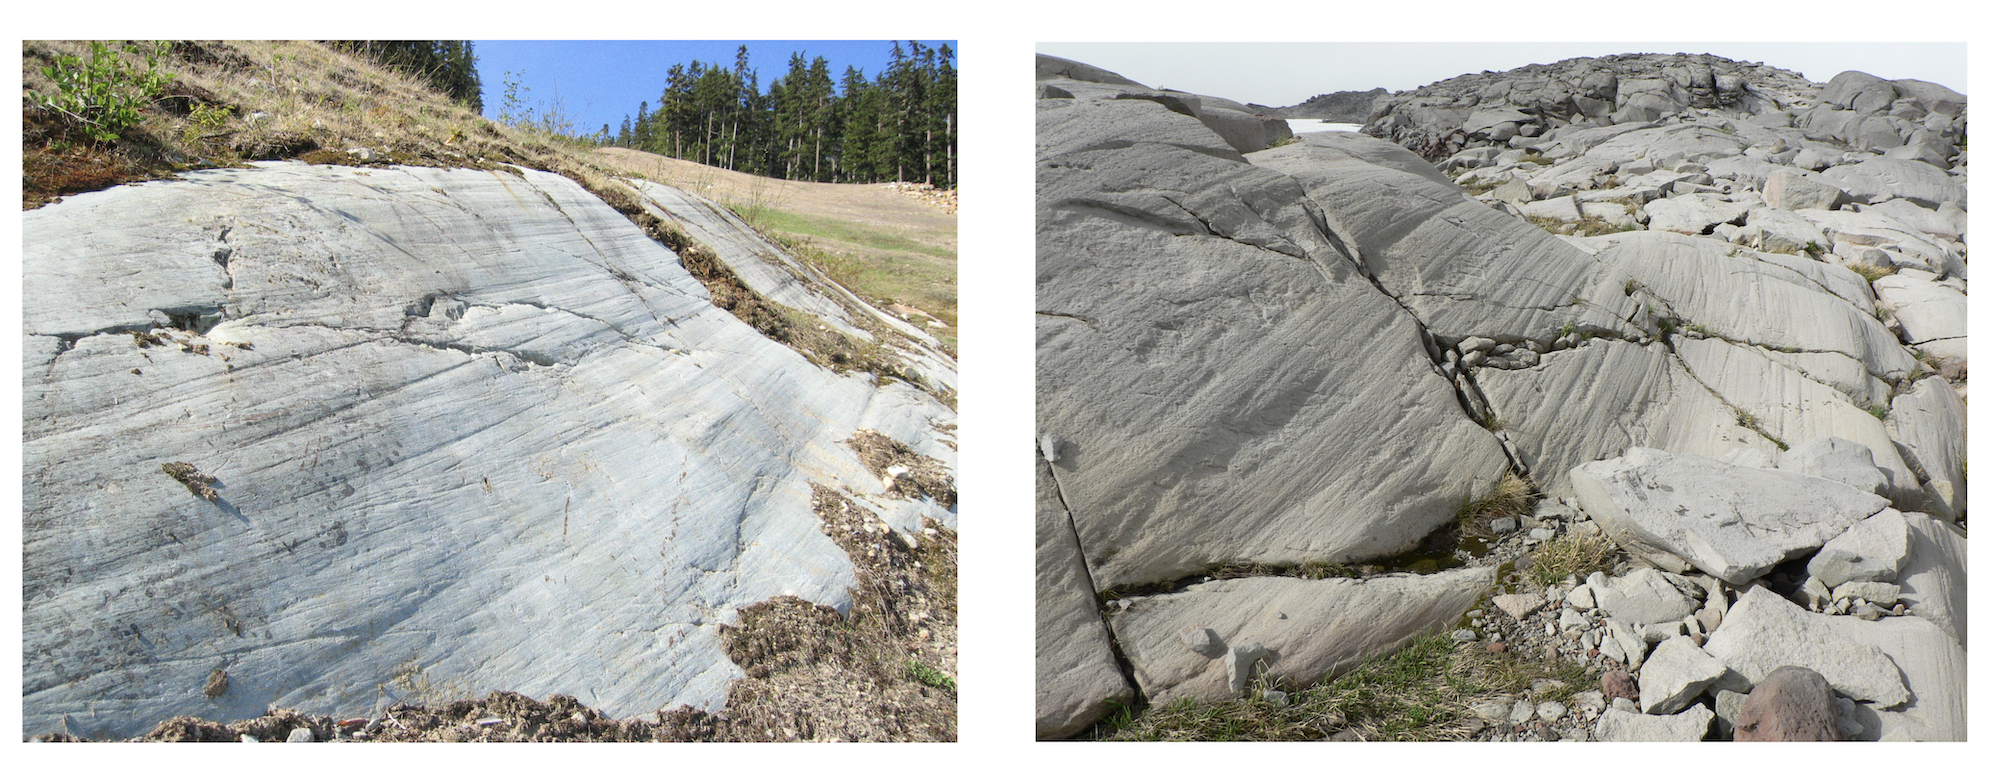 Left: One big, smooth rock with linear grooves. Surrounded by dirt. Right: Smoothed polished rock with grooves abraded into them. All of the groves are aligned in the same direction.